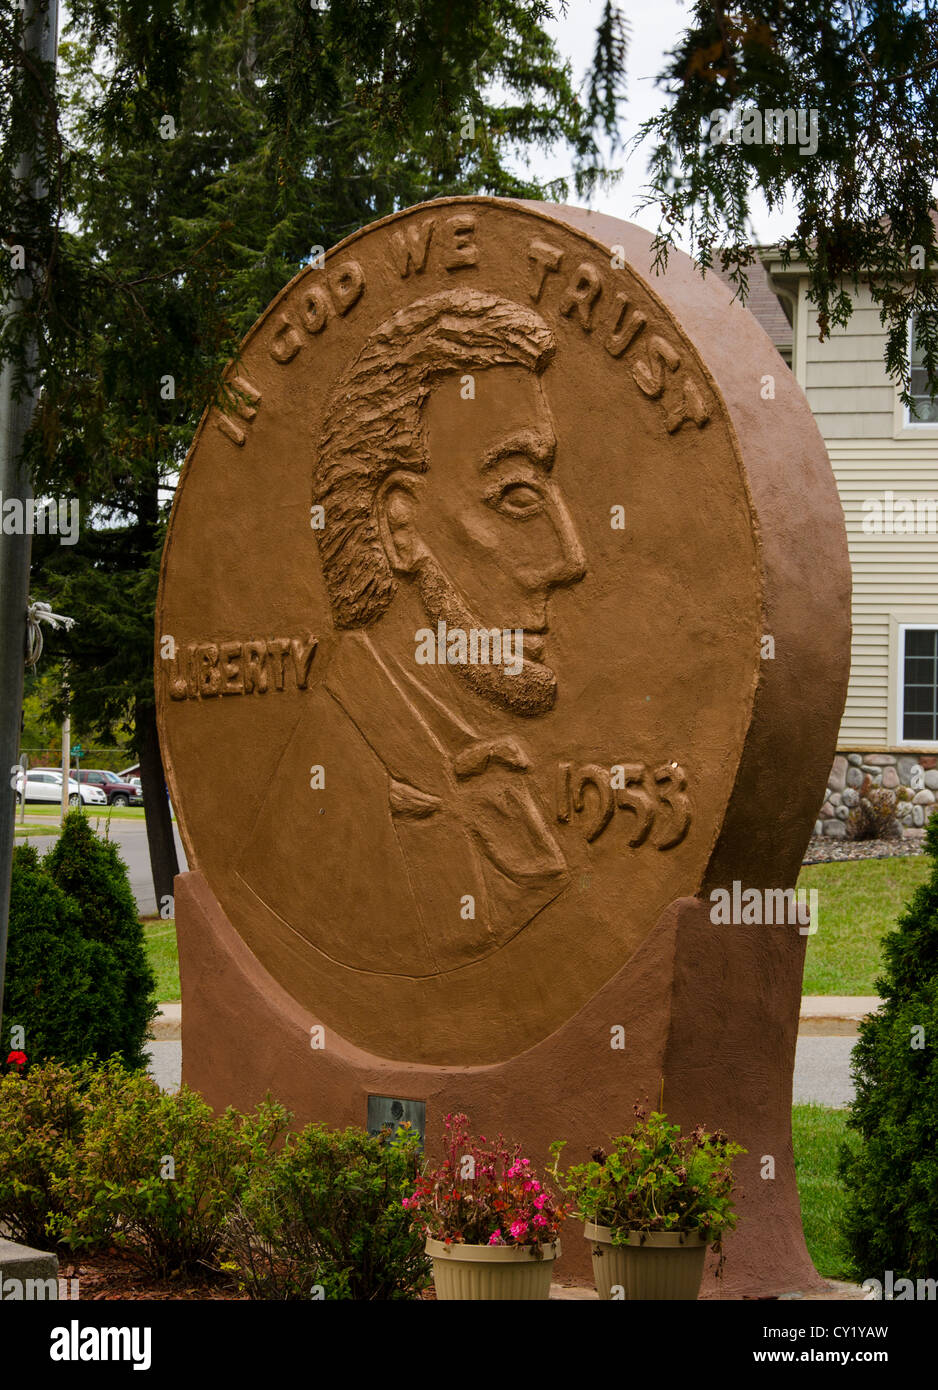 The World's Largest Penny in the Northwoods town of Woodruff, Wisconsin Stock Photo